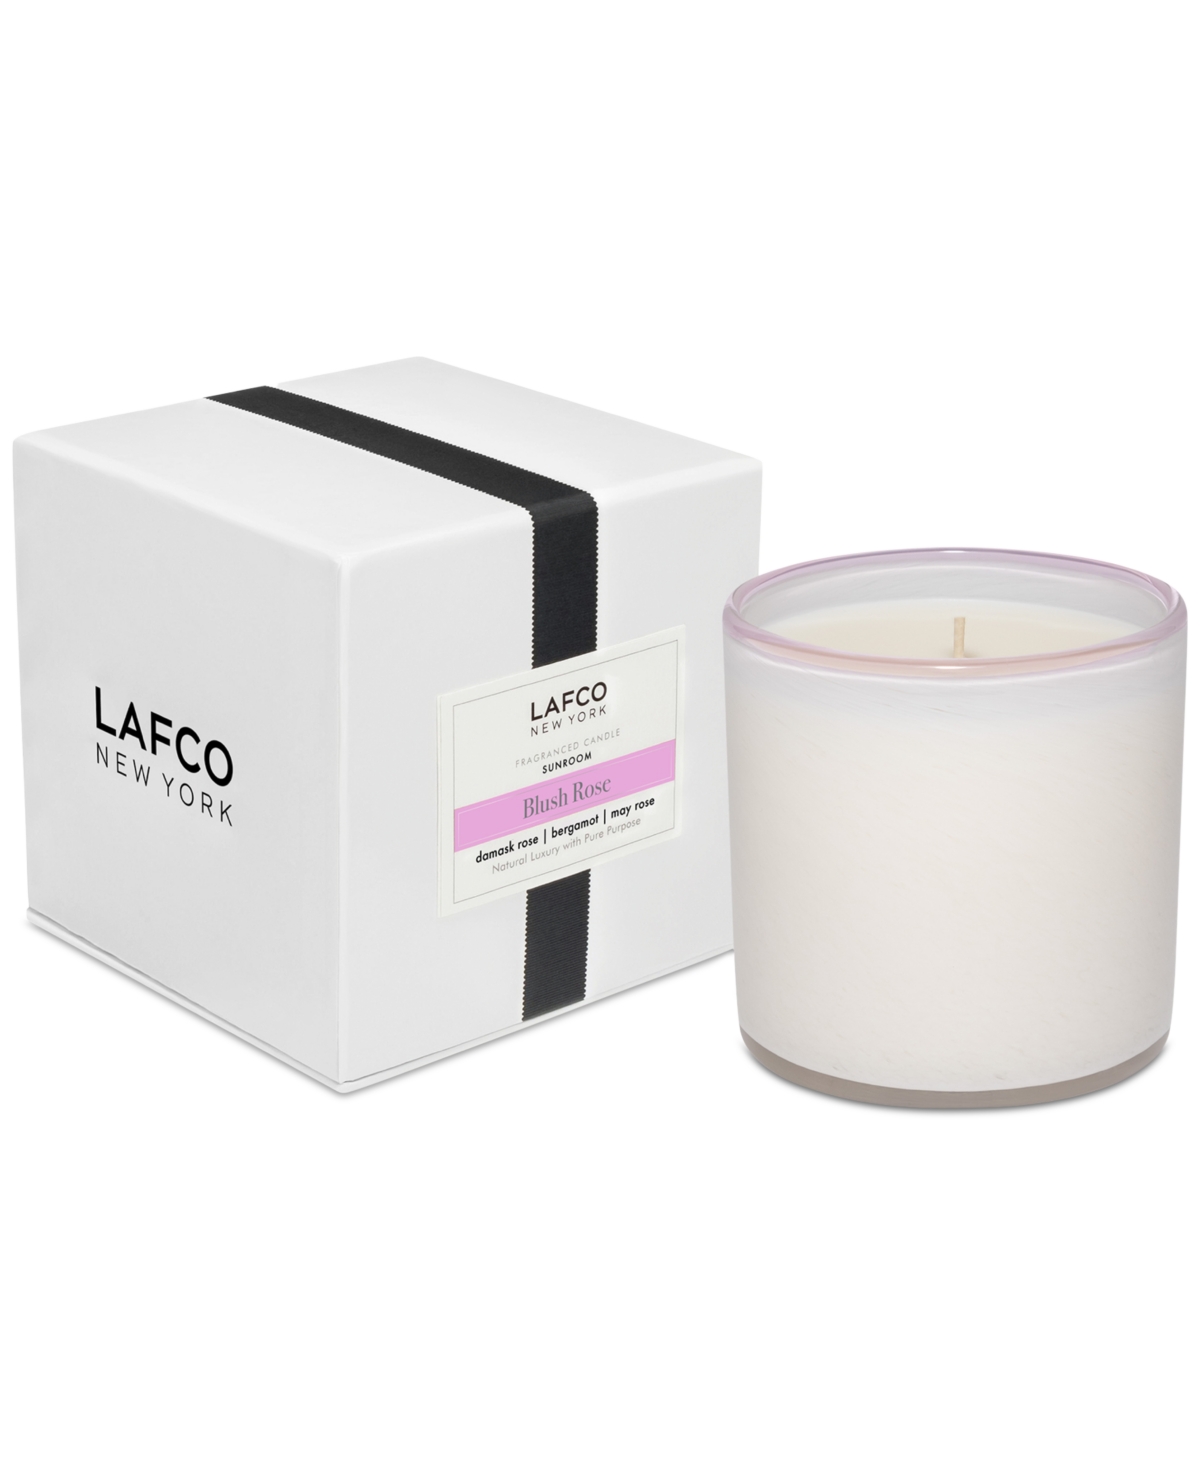 Lafco New York Blush Rose Signature Scented Candle, 15.5 Oz.